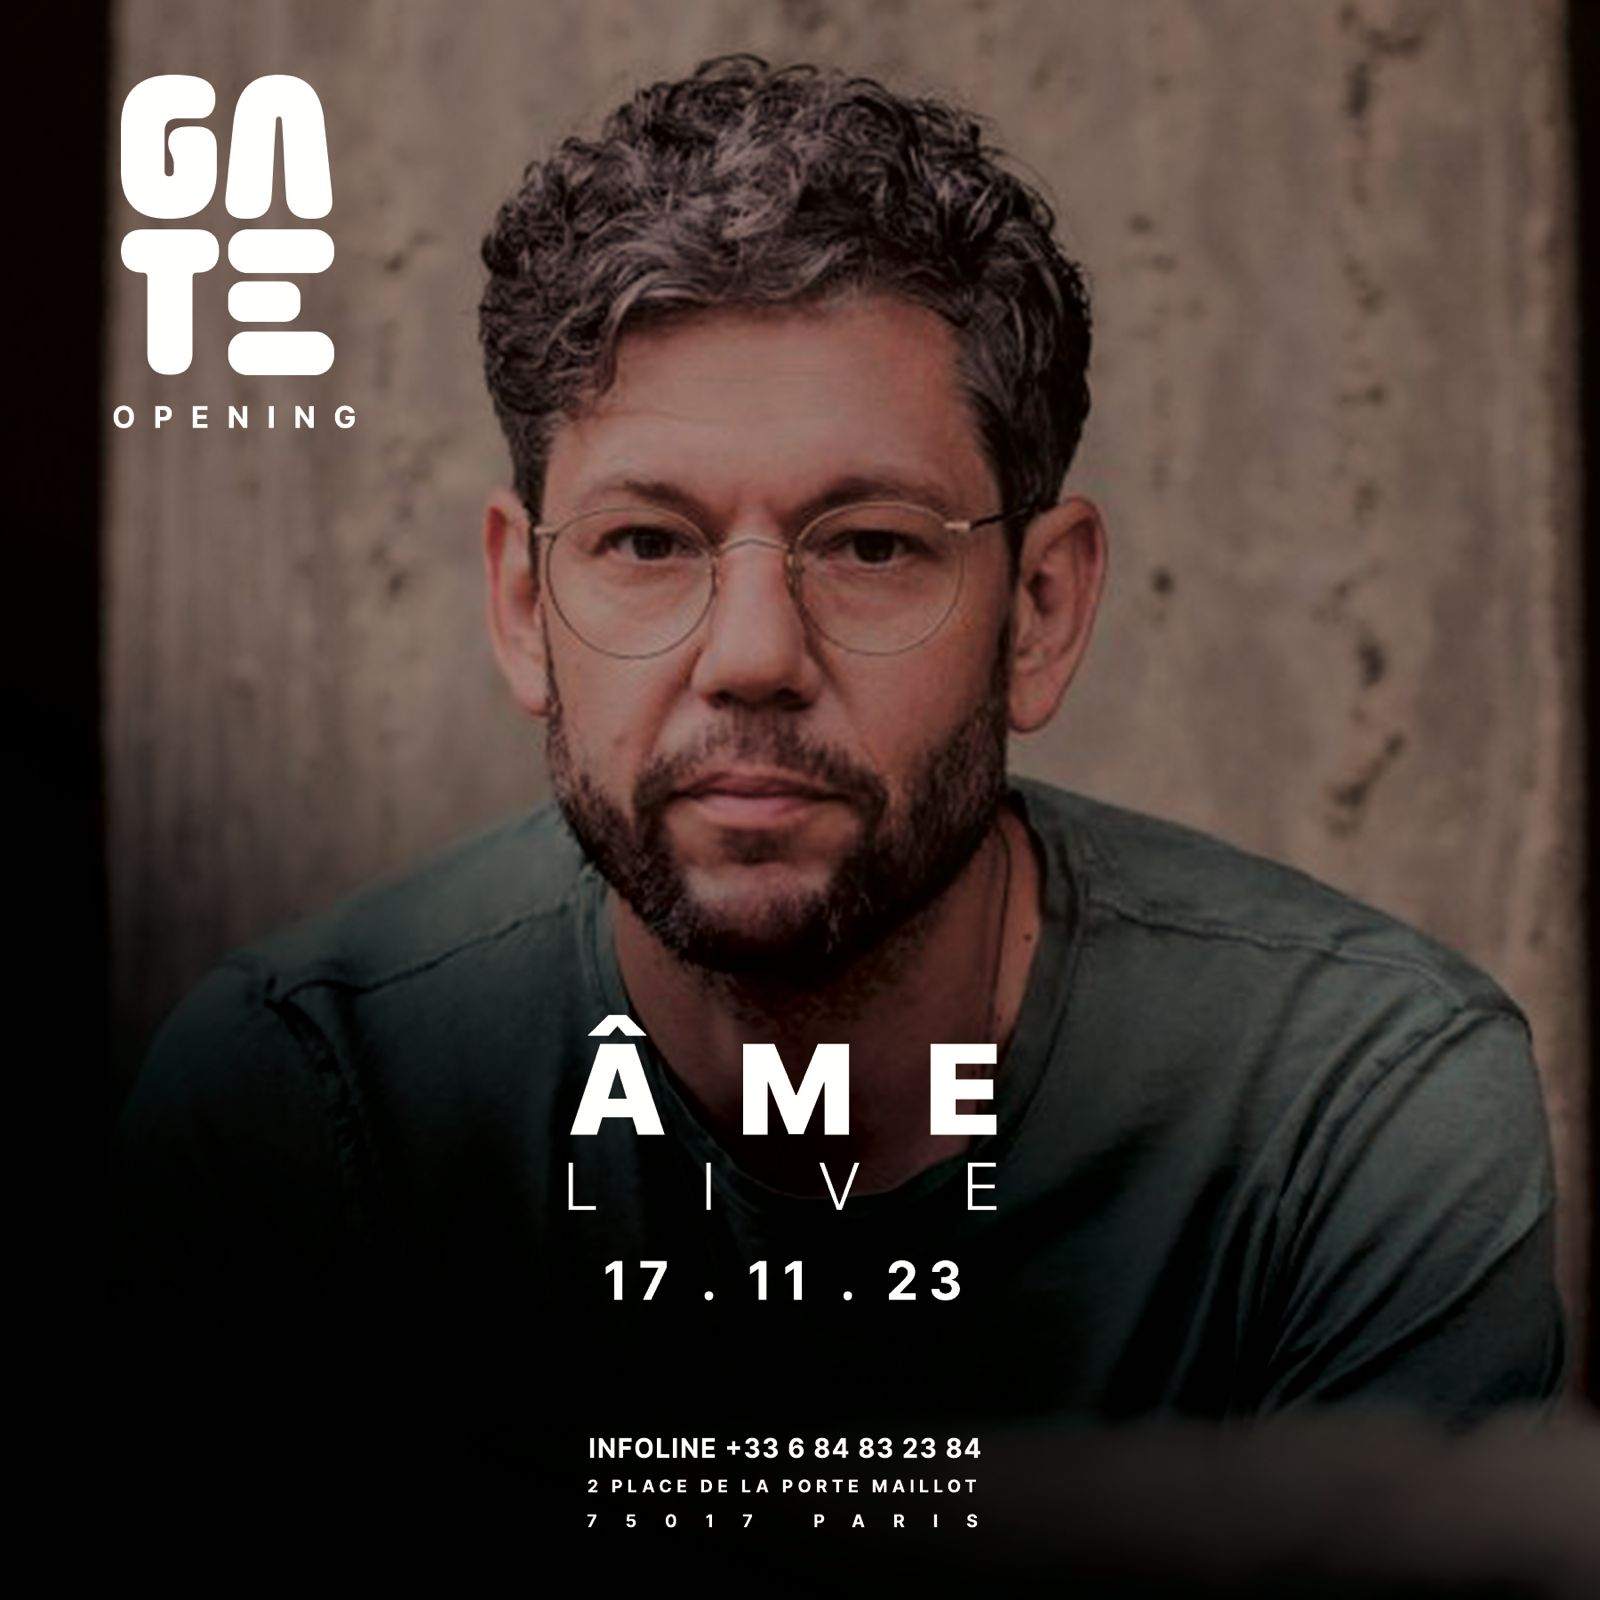 GATE club opening with Âme live - Página frontal